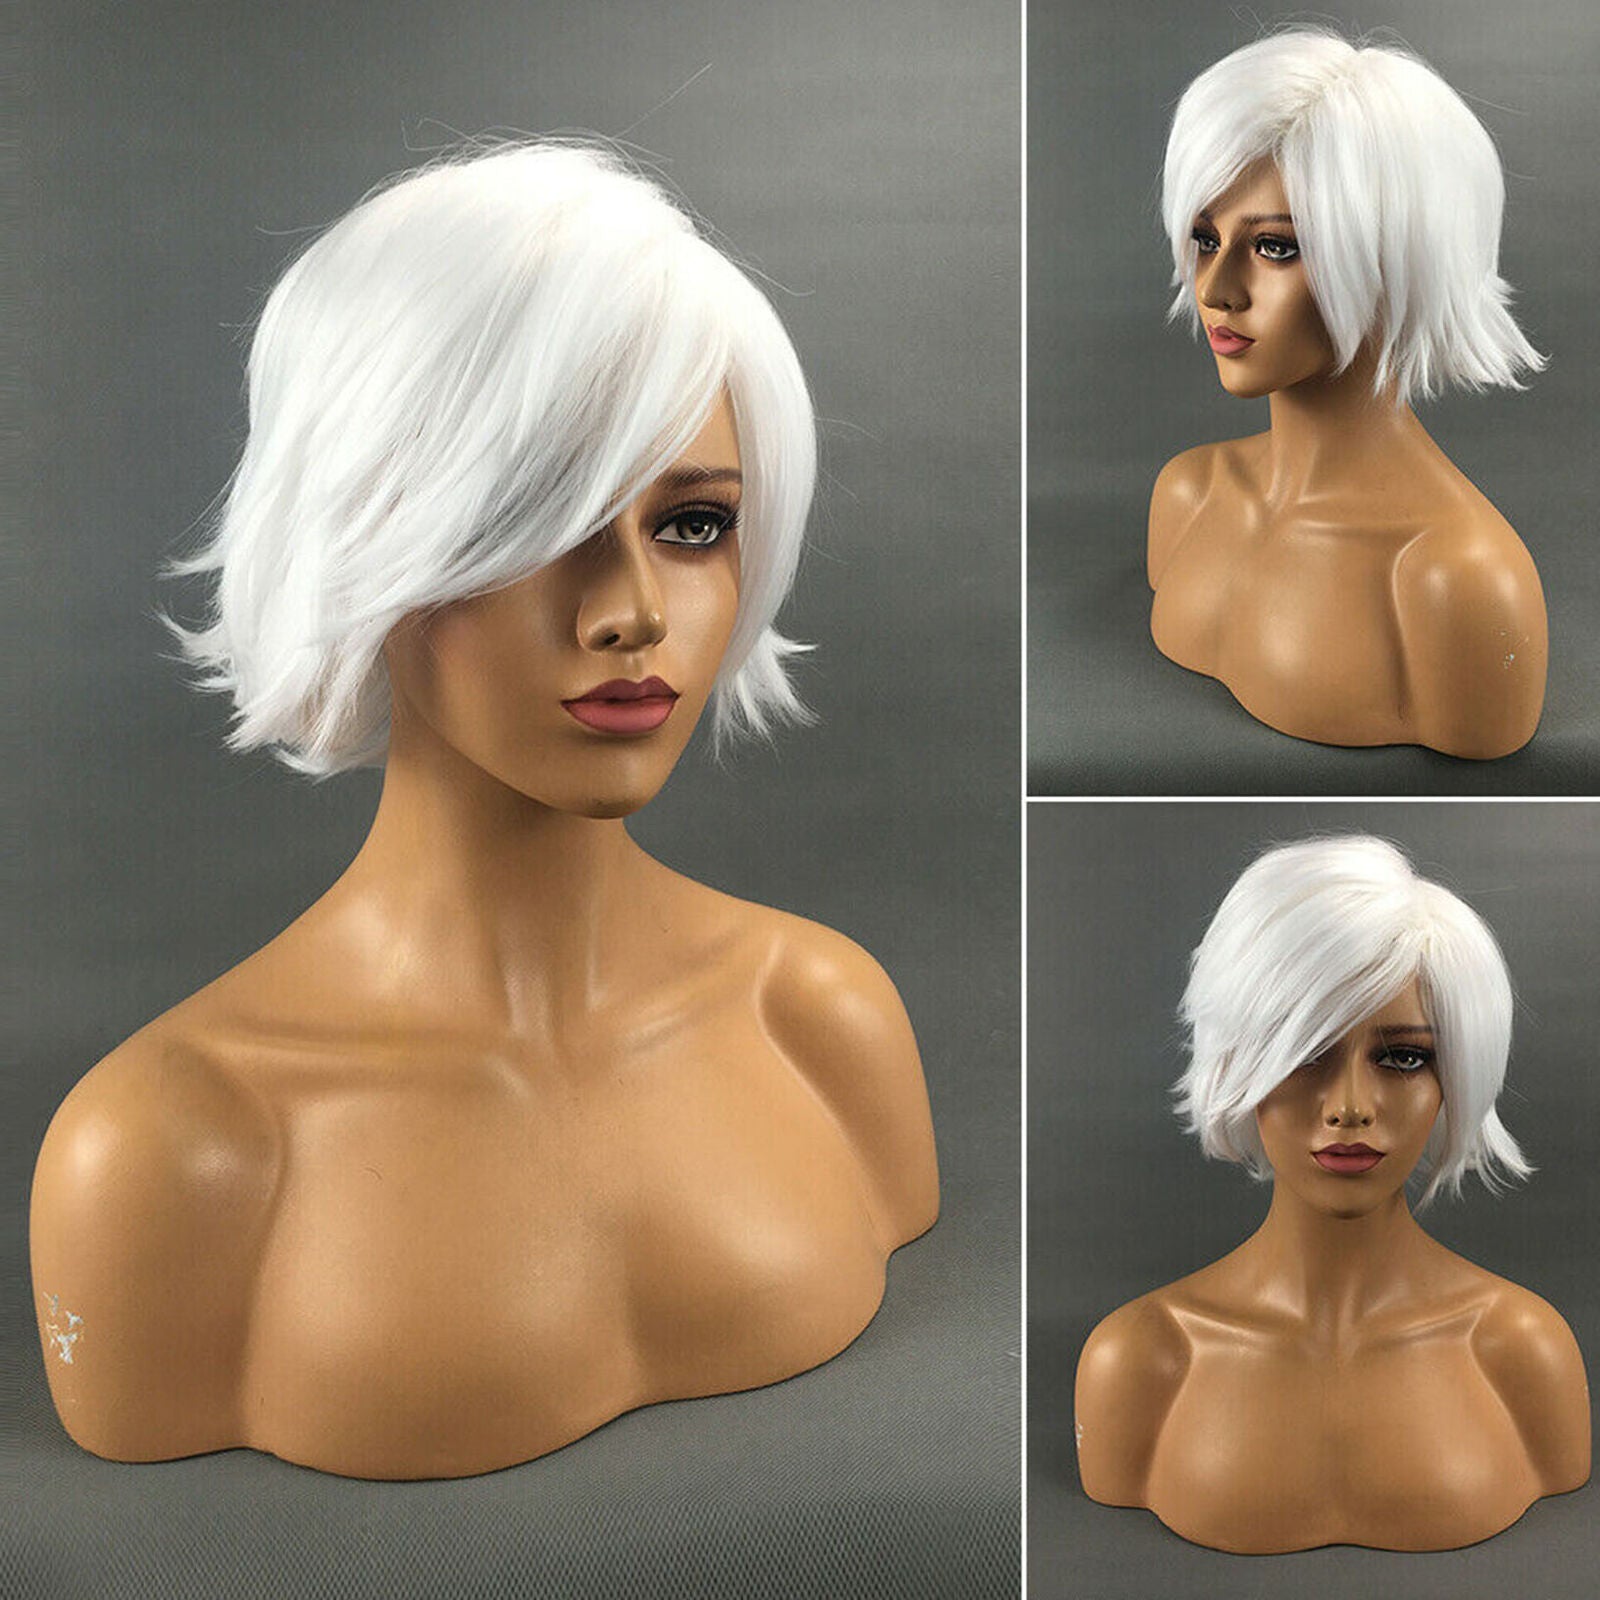 Fashion Women's Short Straight Wigs White Synthetic Natural Full Hair Bob Wig